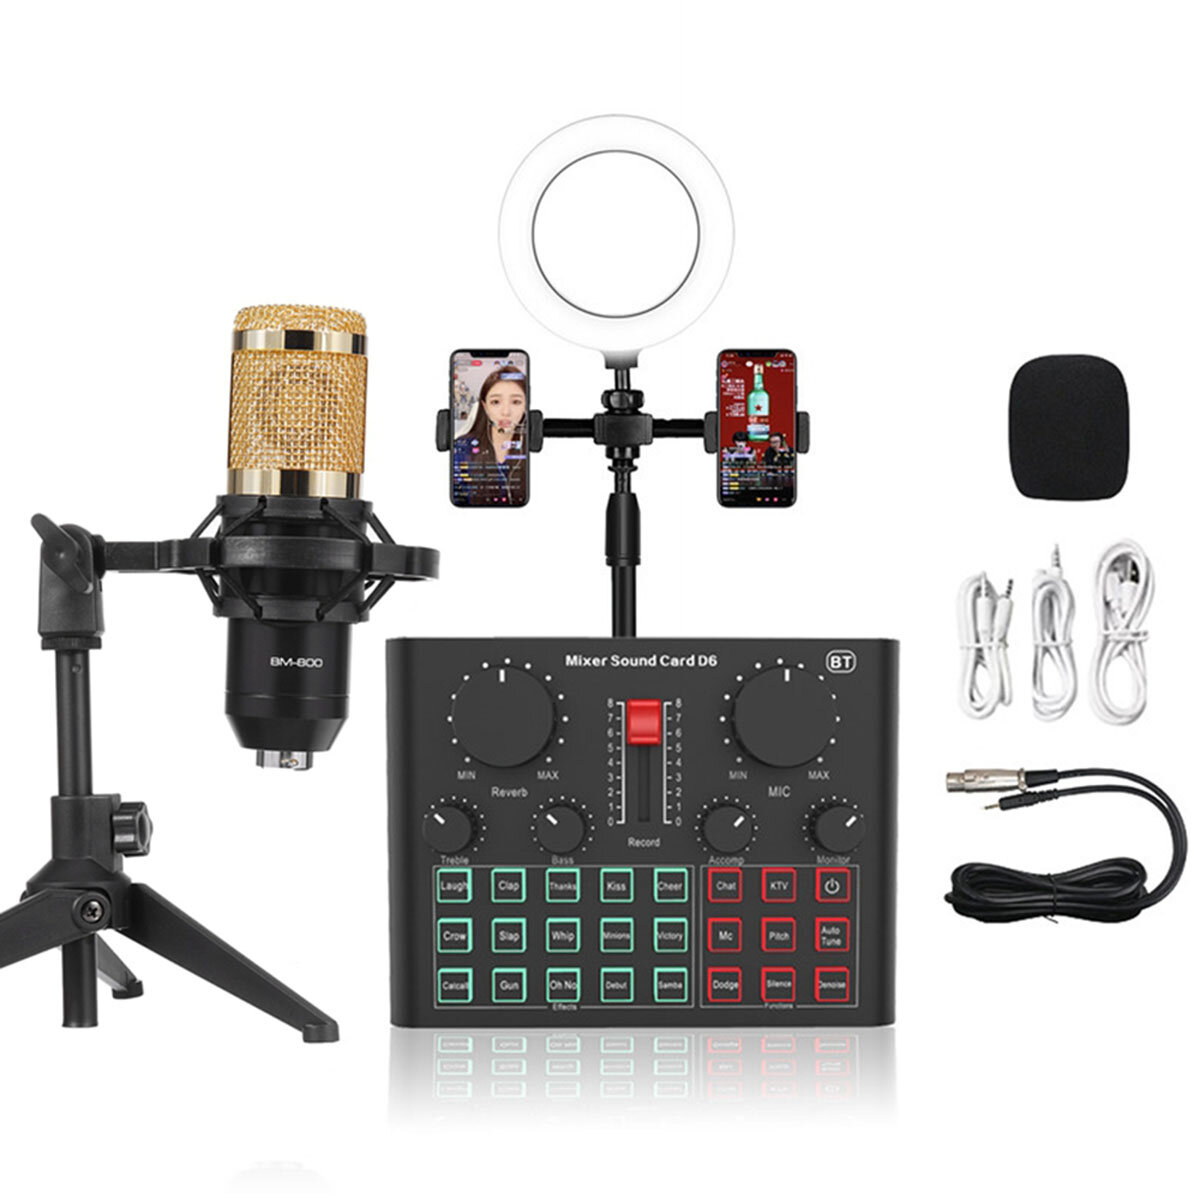 Image of D6 bluetooth USB Sound Card Mixer Suit with BM800 Condenser Microphone BG16 Fill Light for PC Computer Game Live Broadca